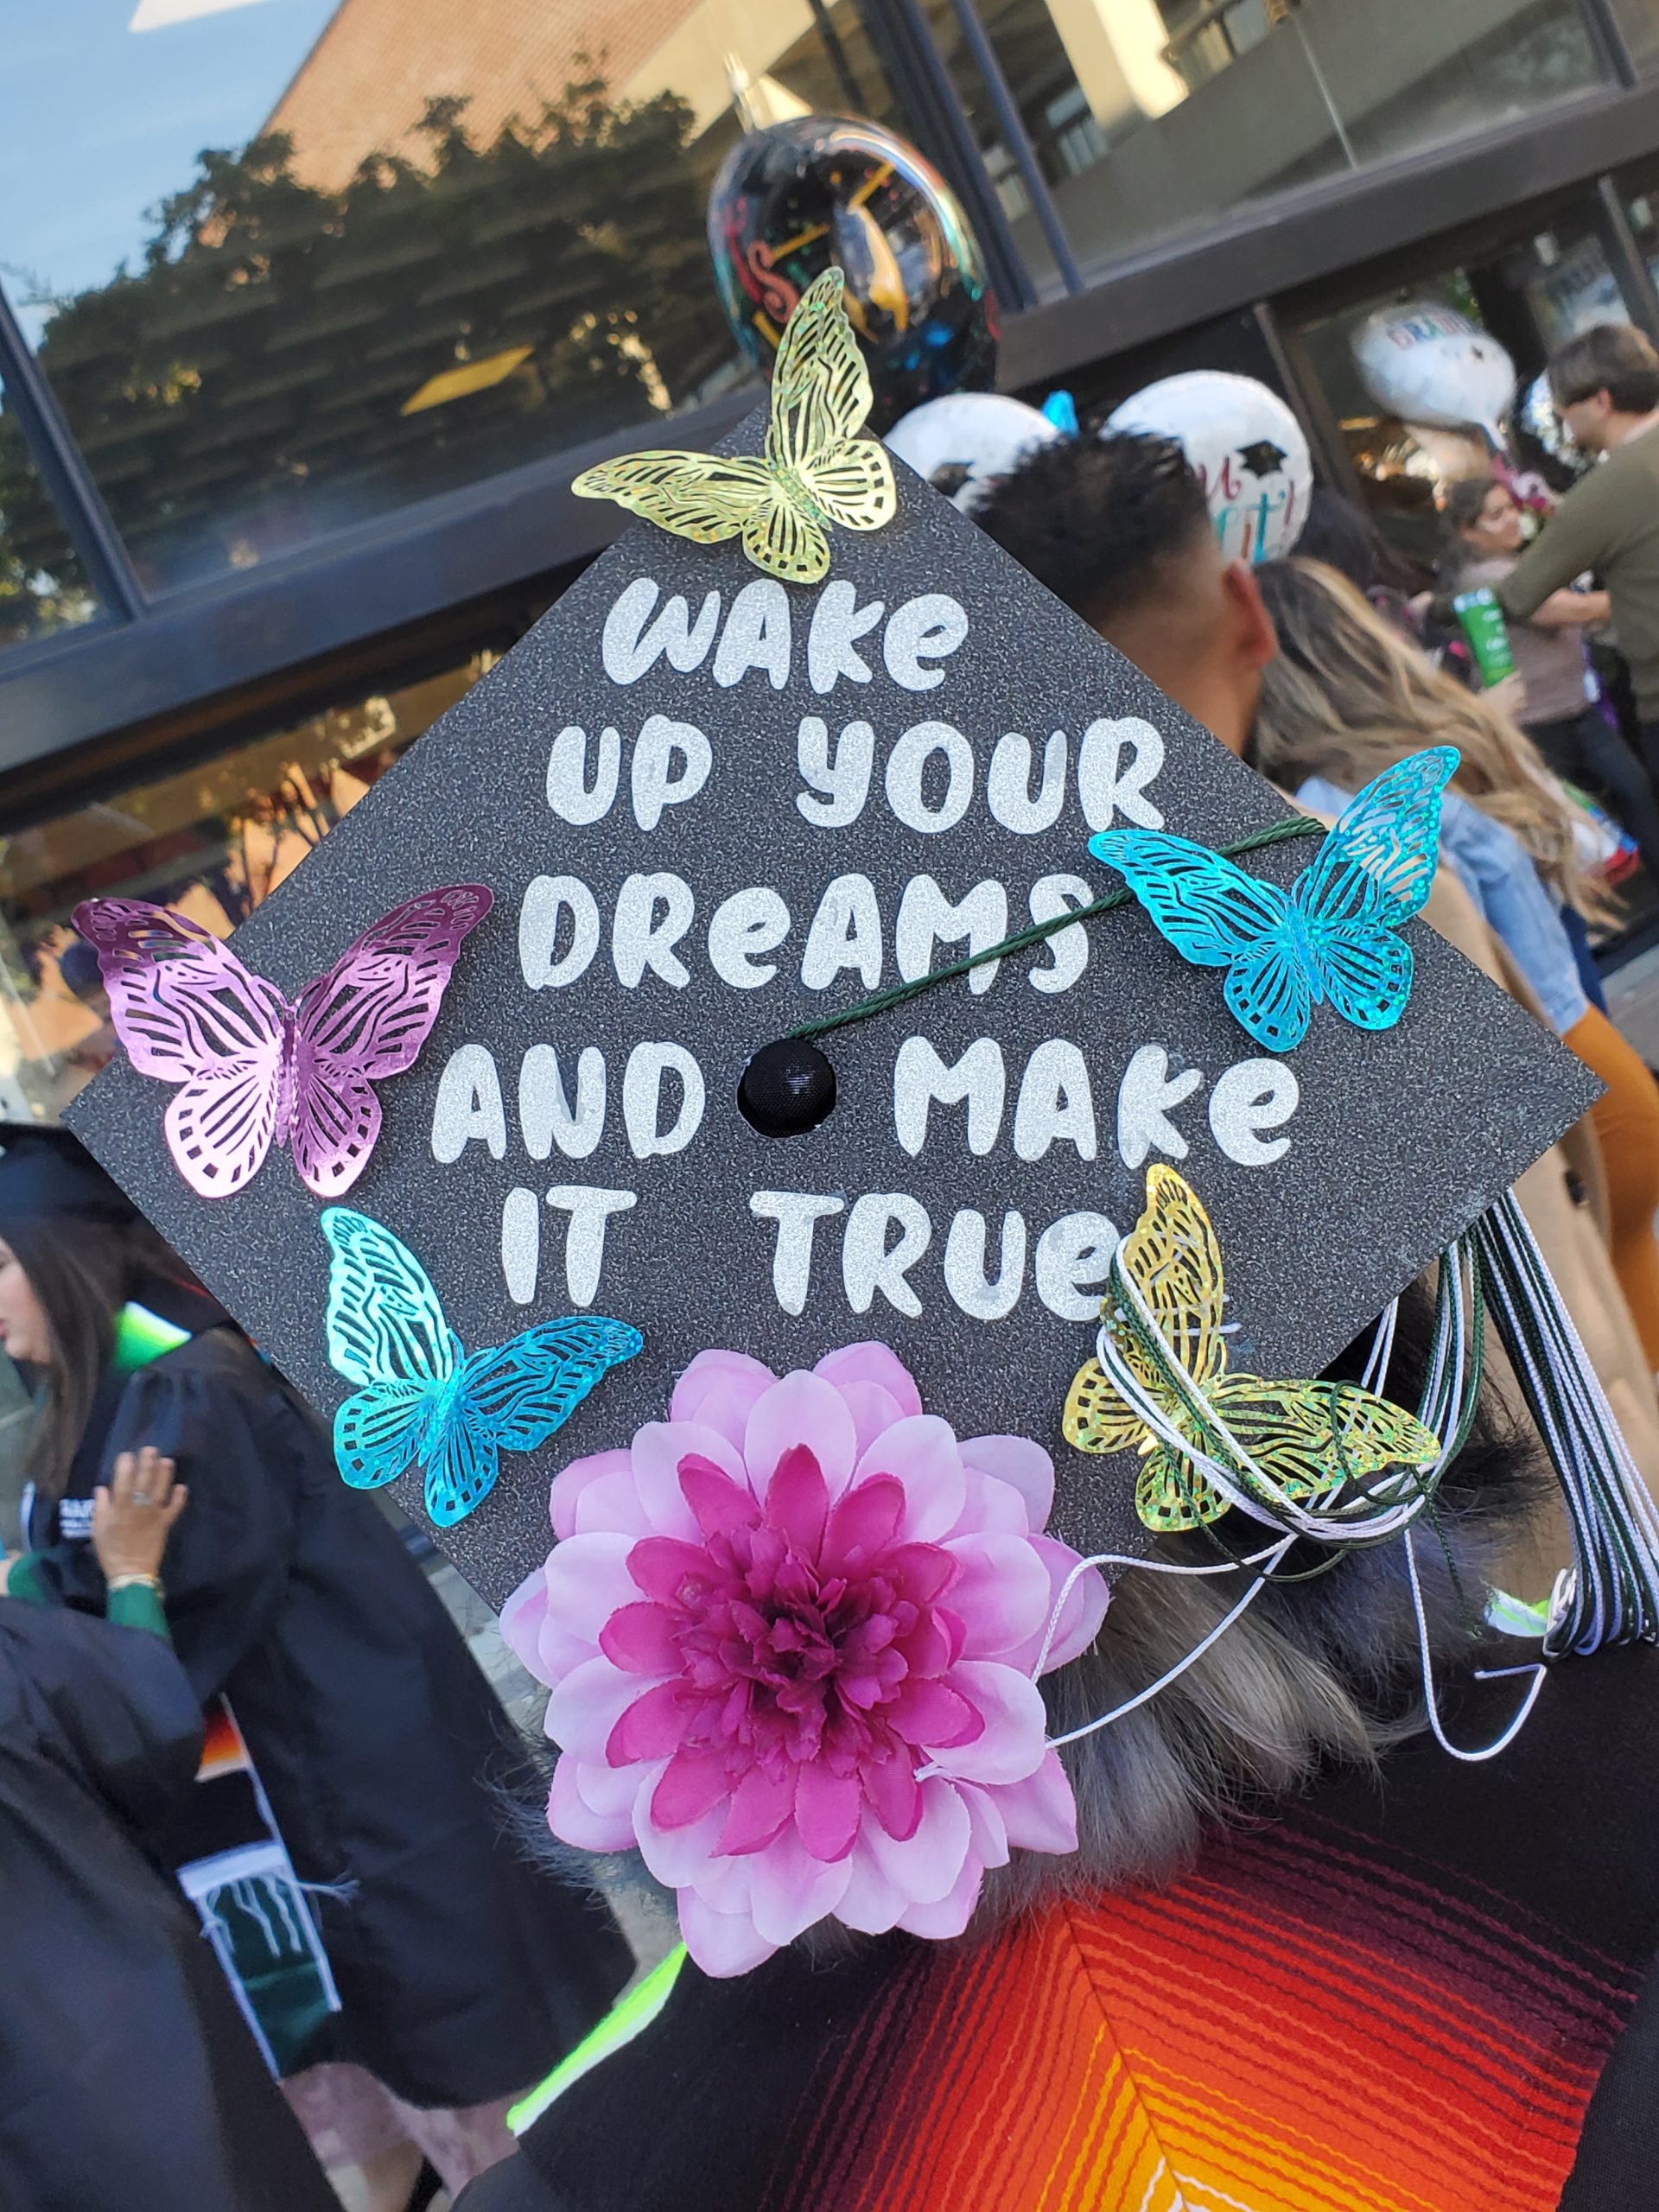 A graduation cap with the words "Wake up your dreams and make it true" glued on the top, along with paper butterflies and a flower